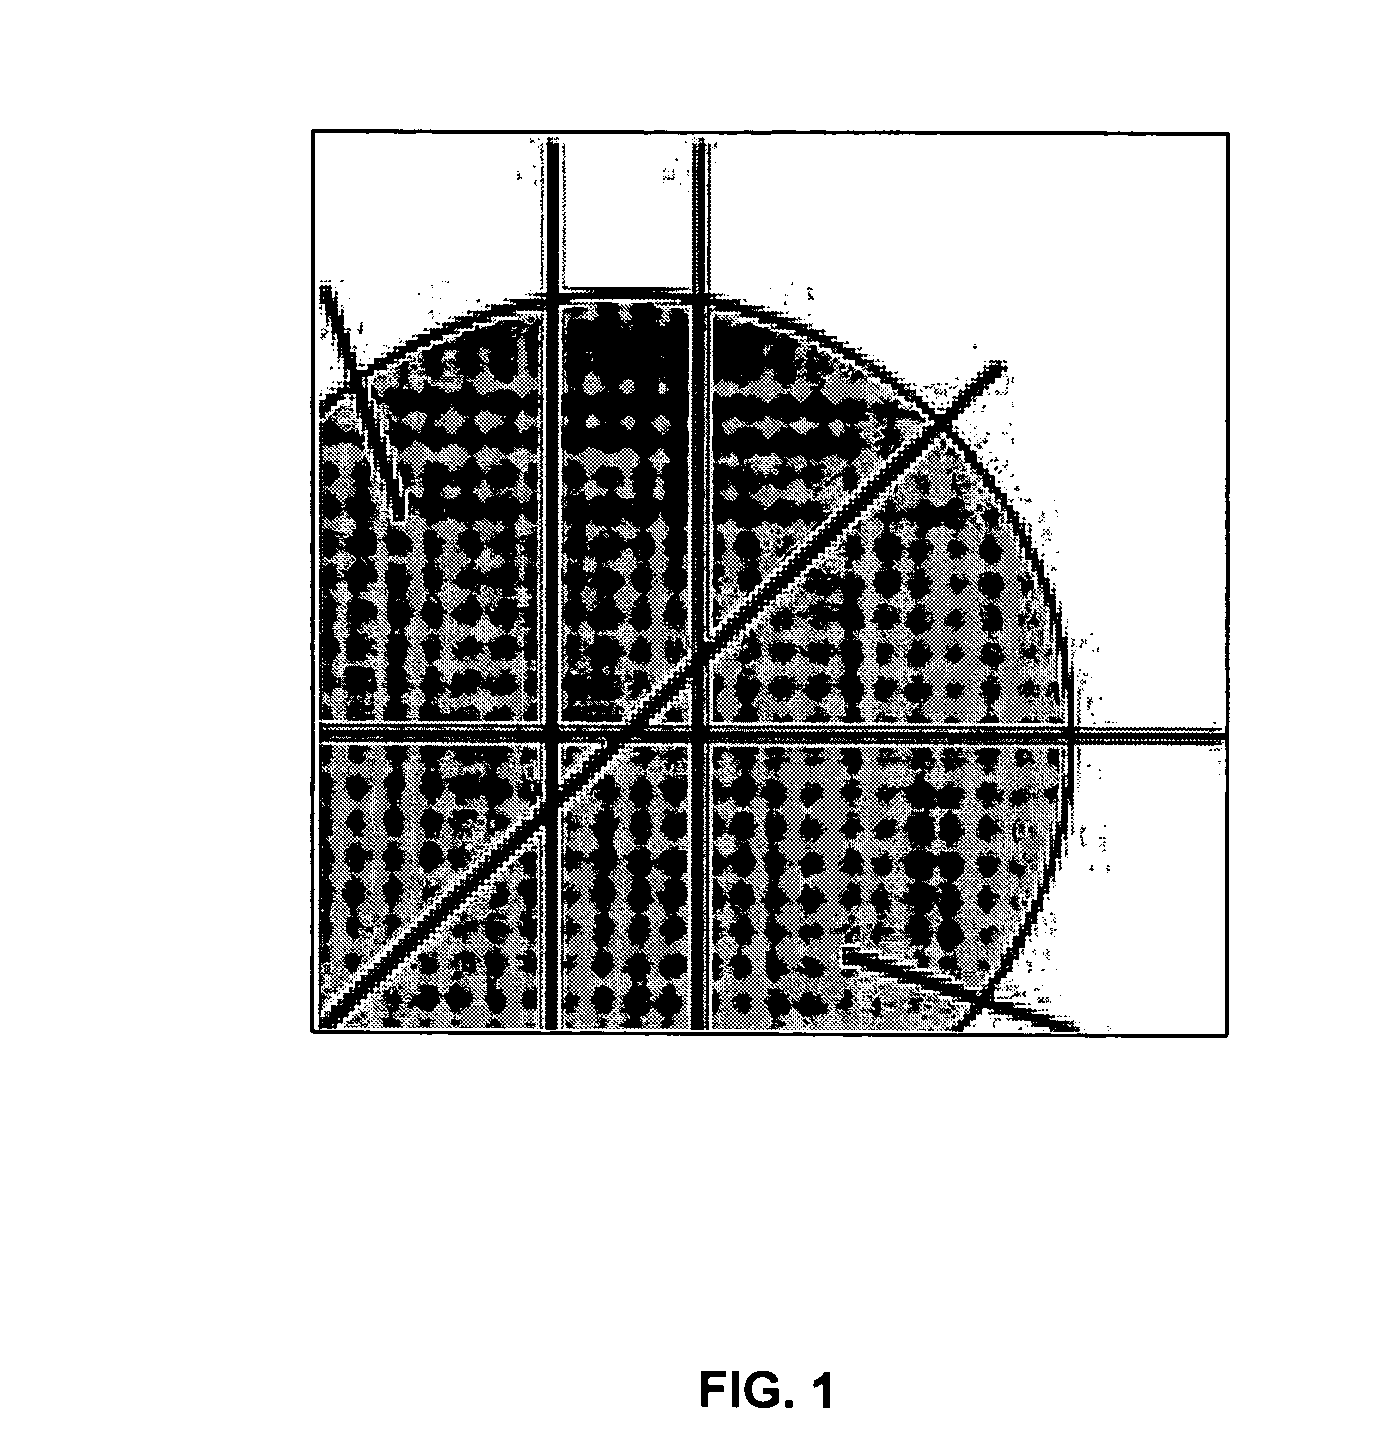 Method and system for mosquito noise reduction